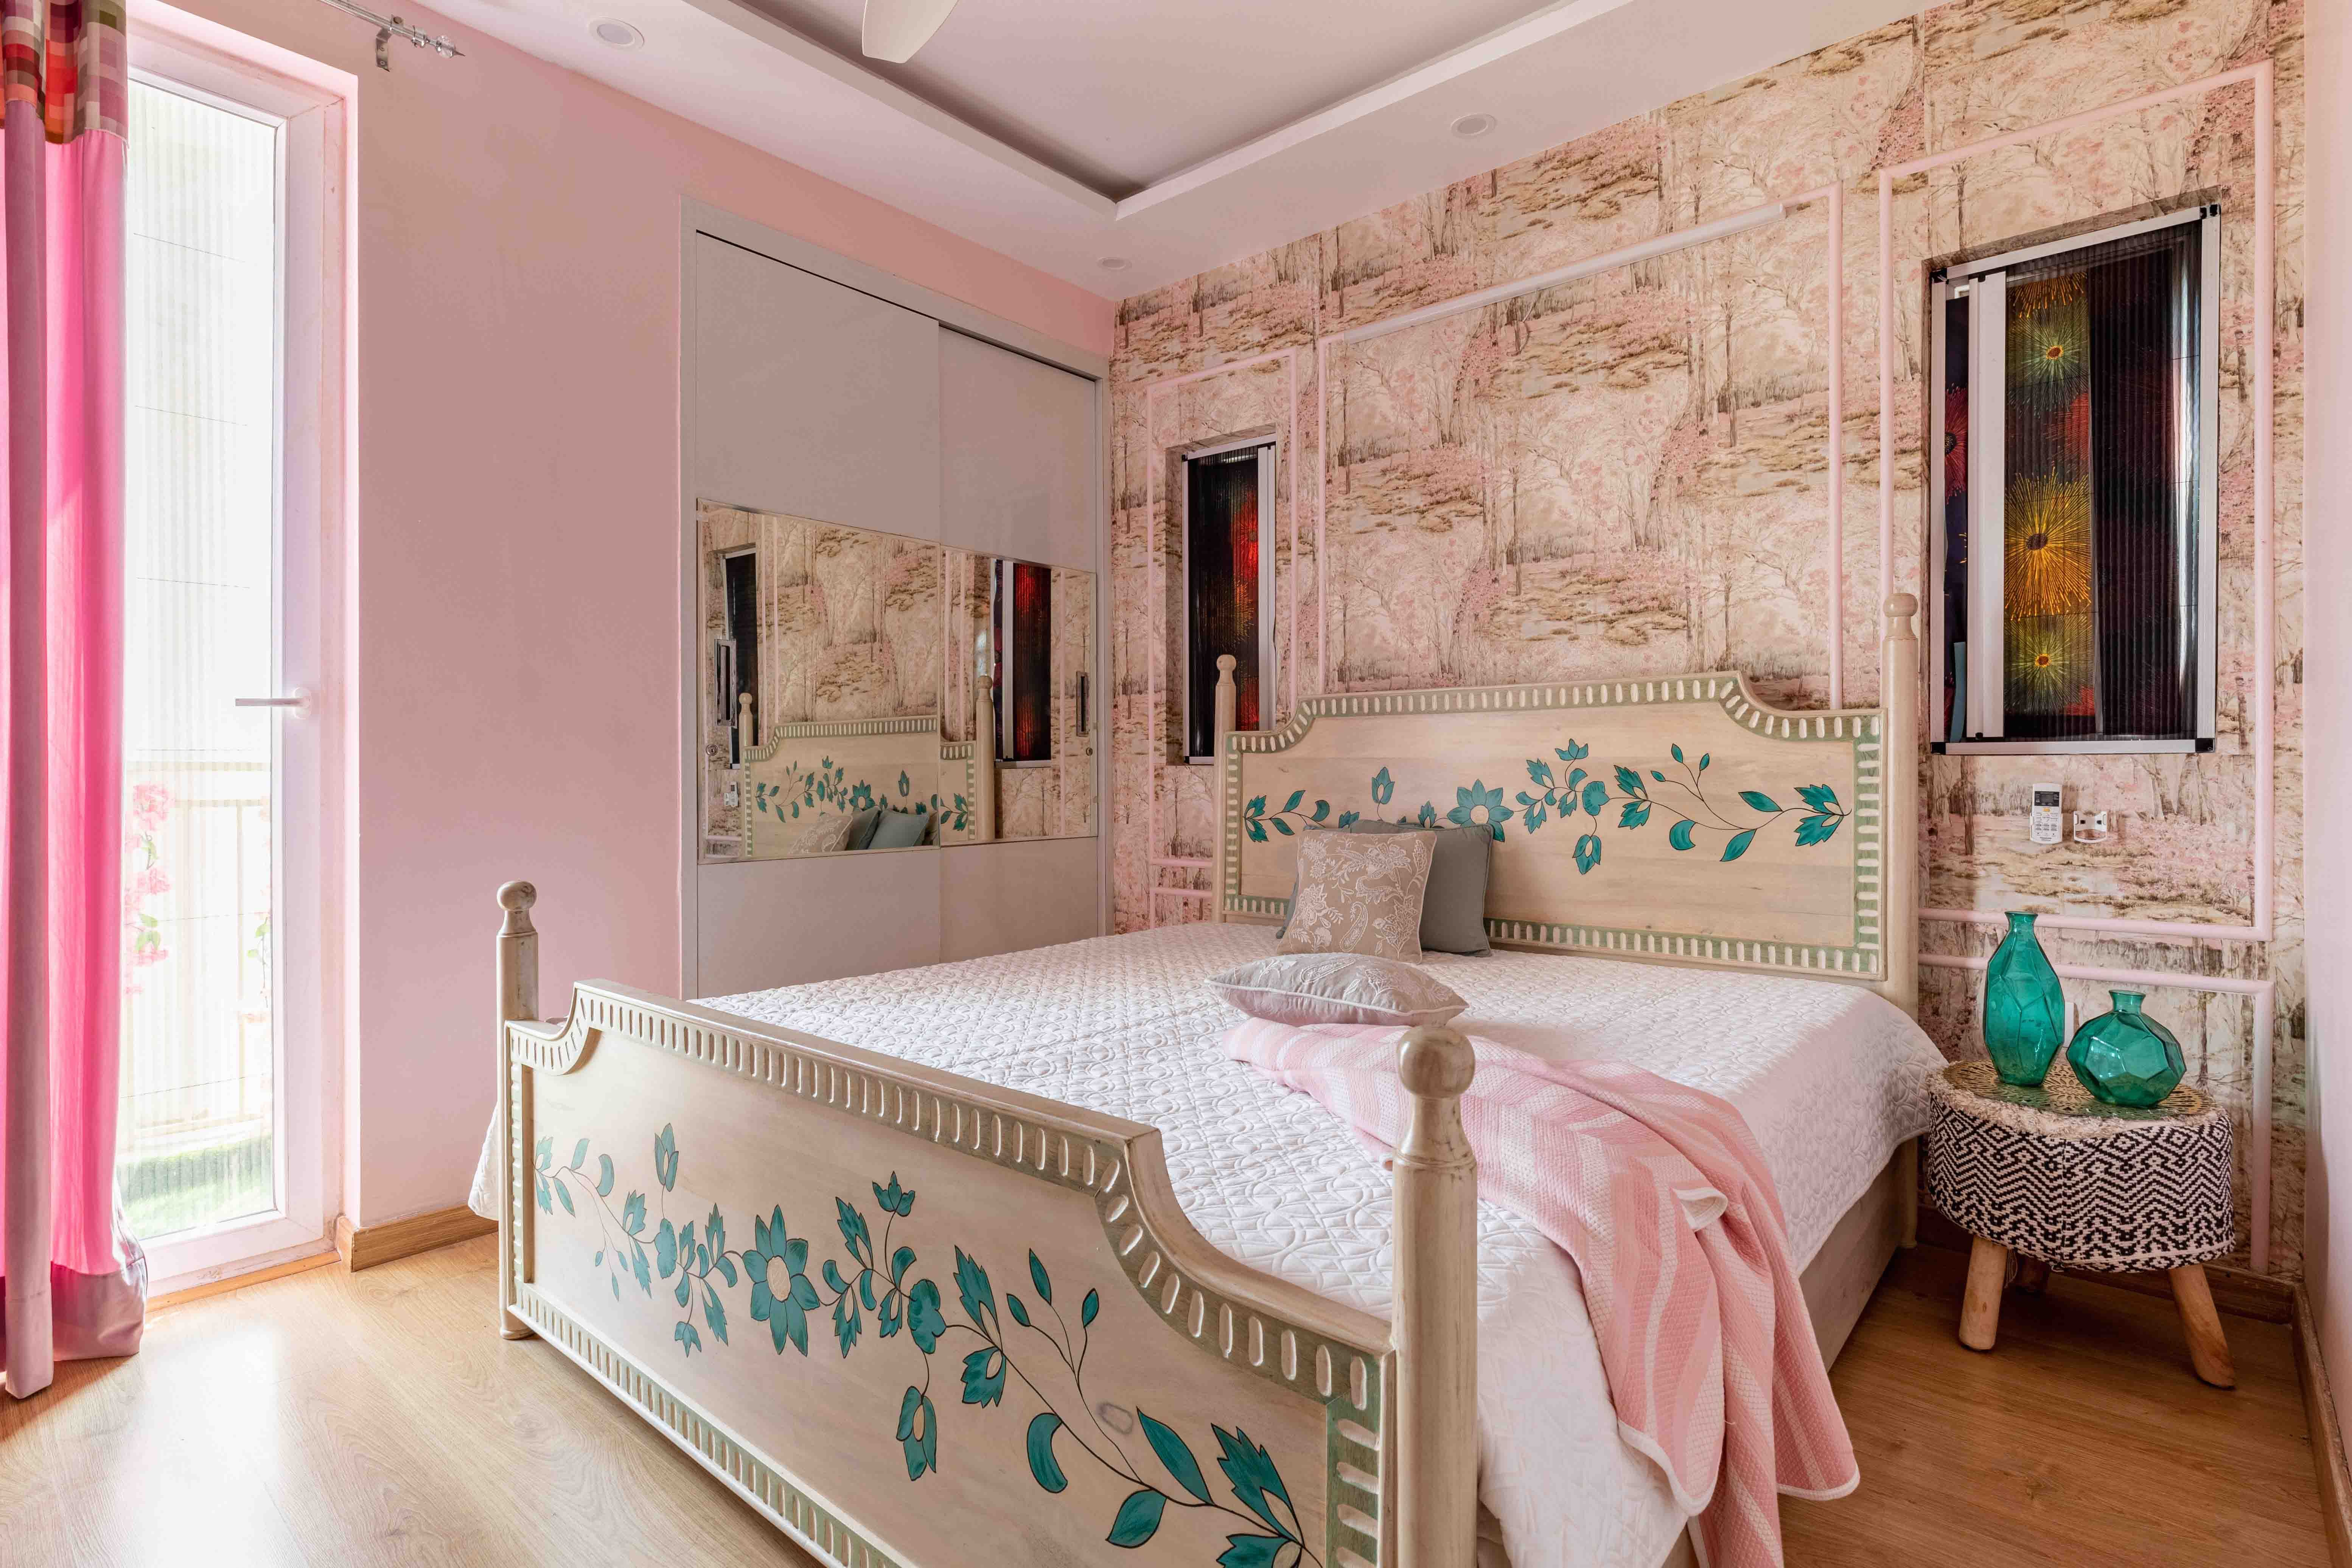 Modern Bedroom Wall Design With Pink Abstract Wallpaper